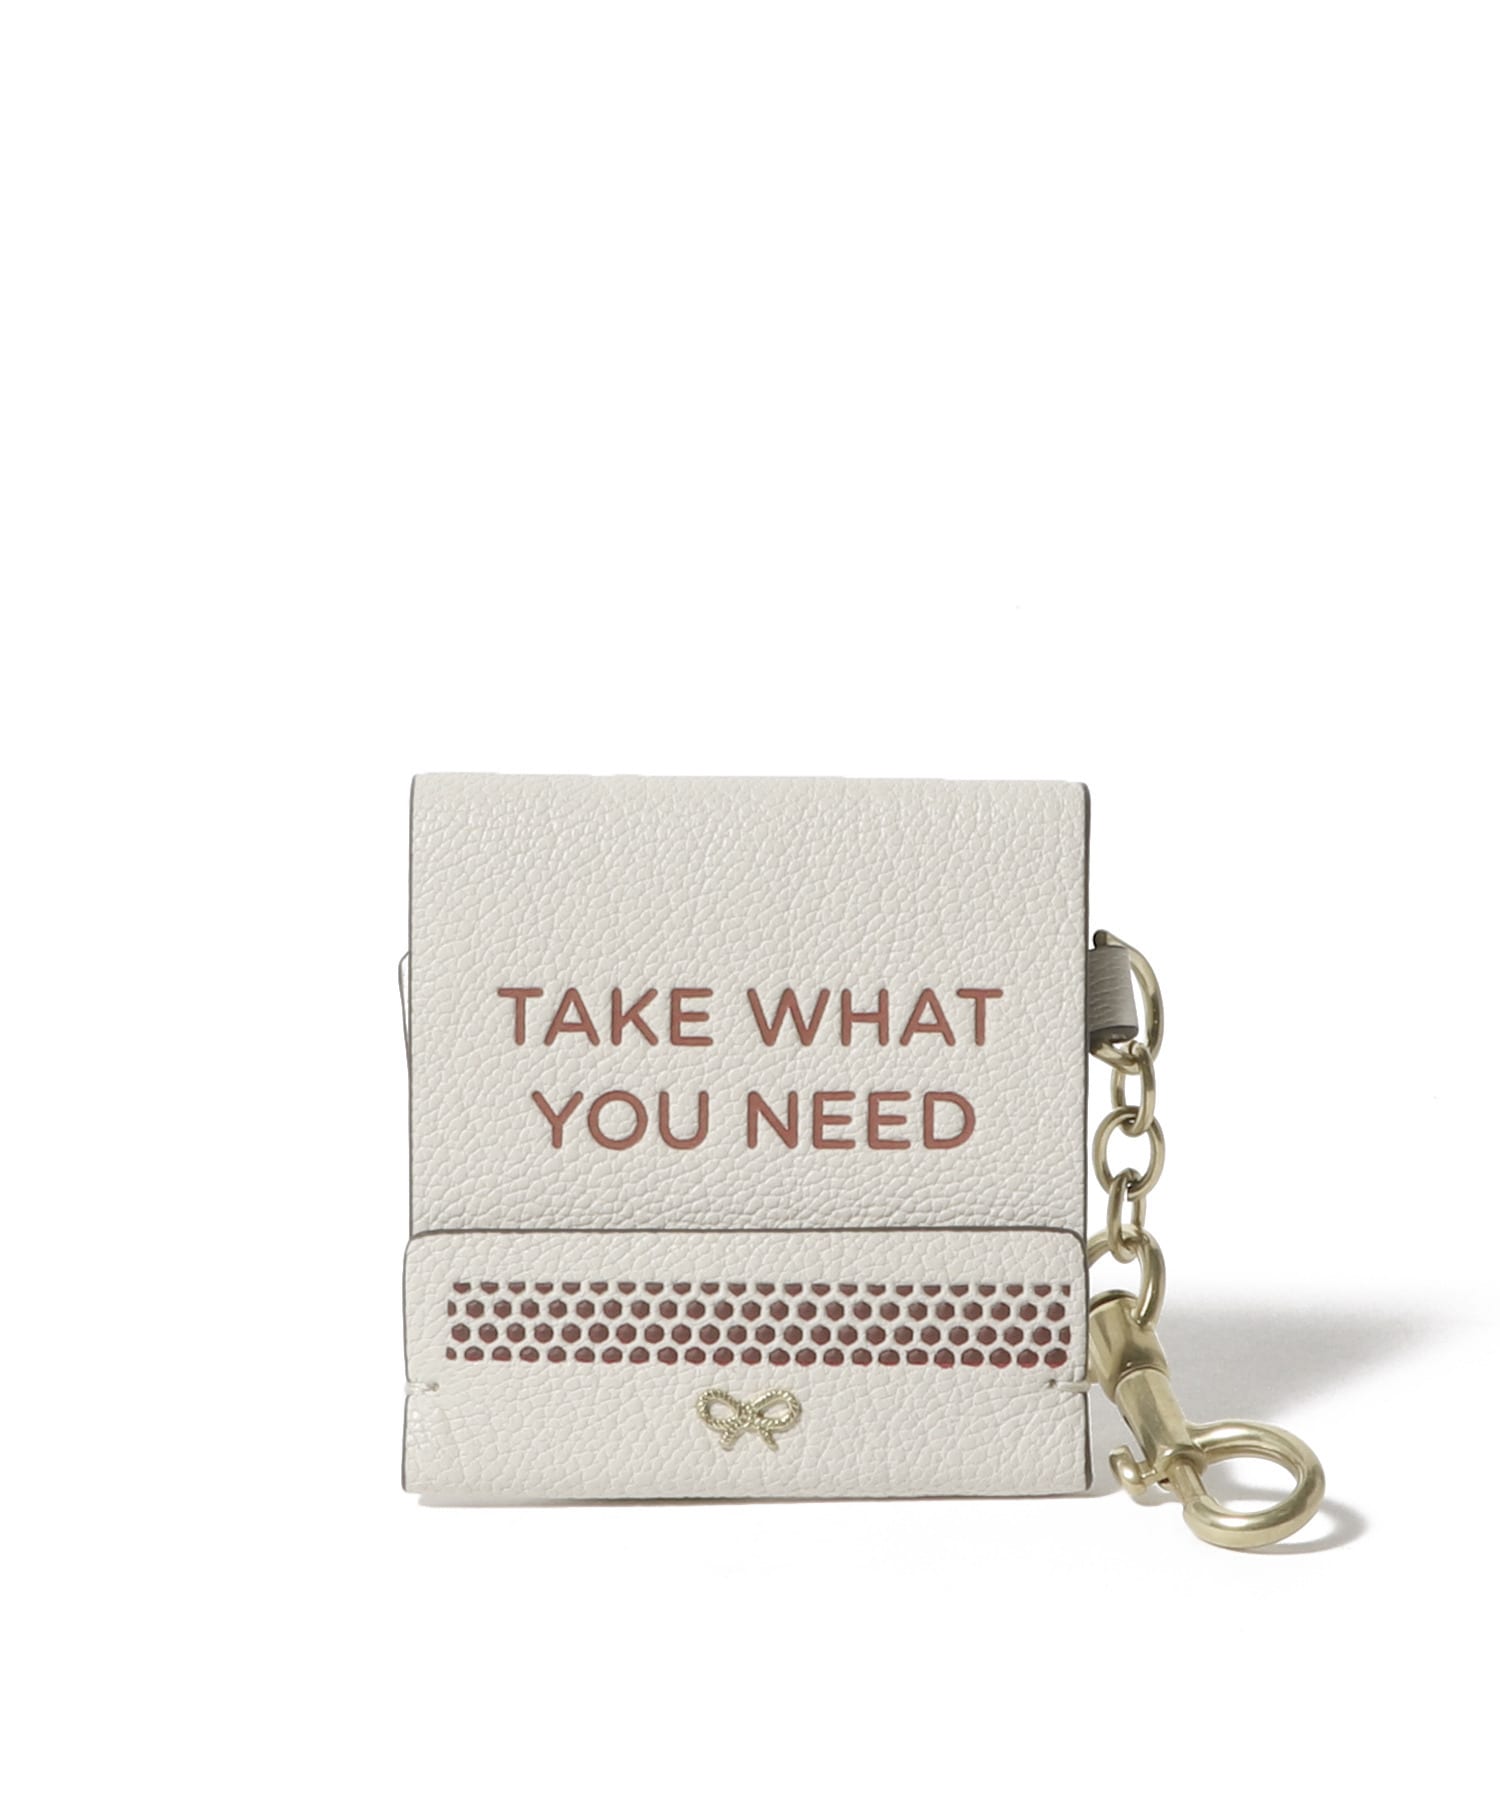 TAKE WHAT YOU NEED バッグチャーム